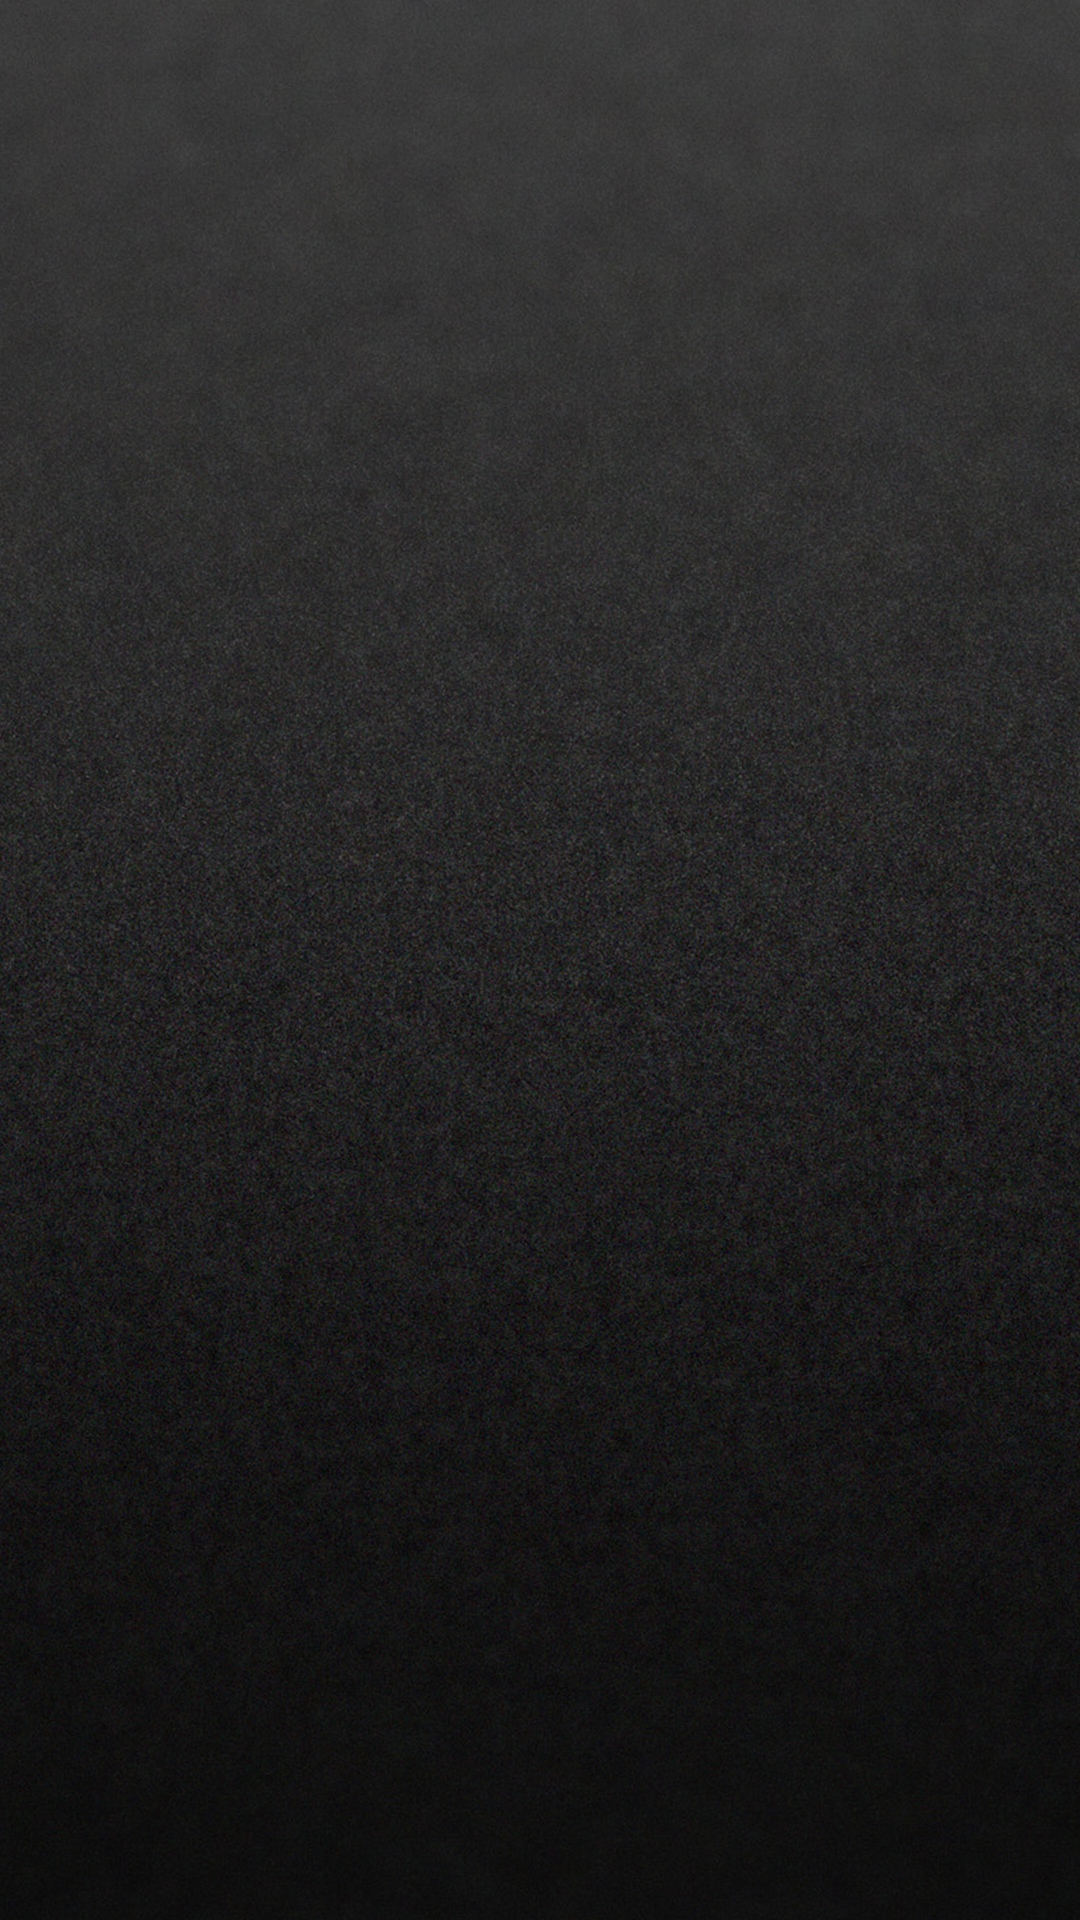 Wallpaper for galaxy s4 with gray gradient carbonfiber texture in 1080x1920 resolution